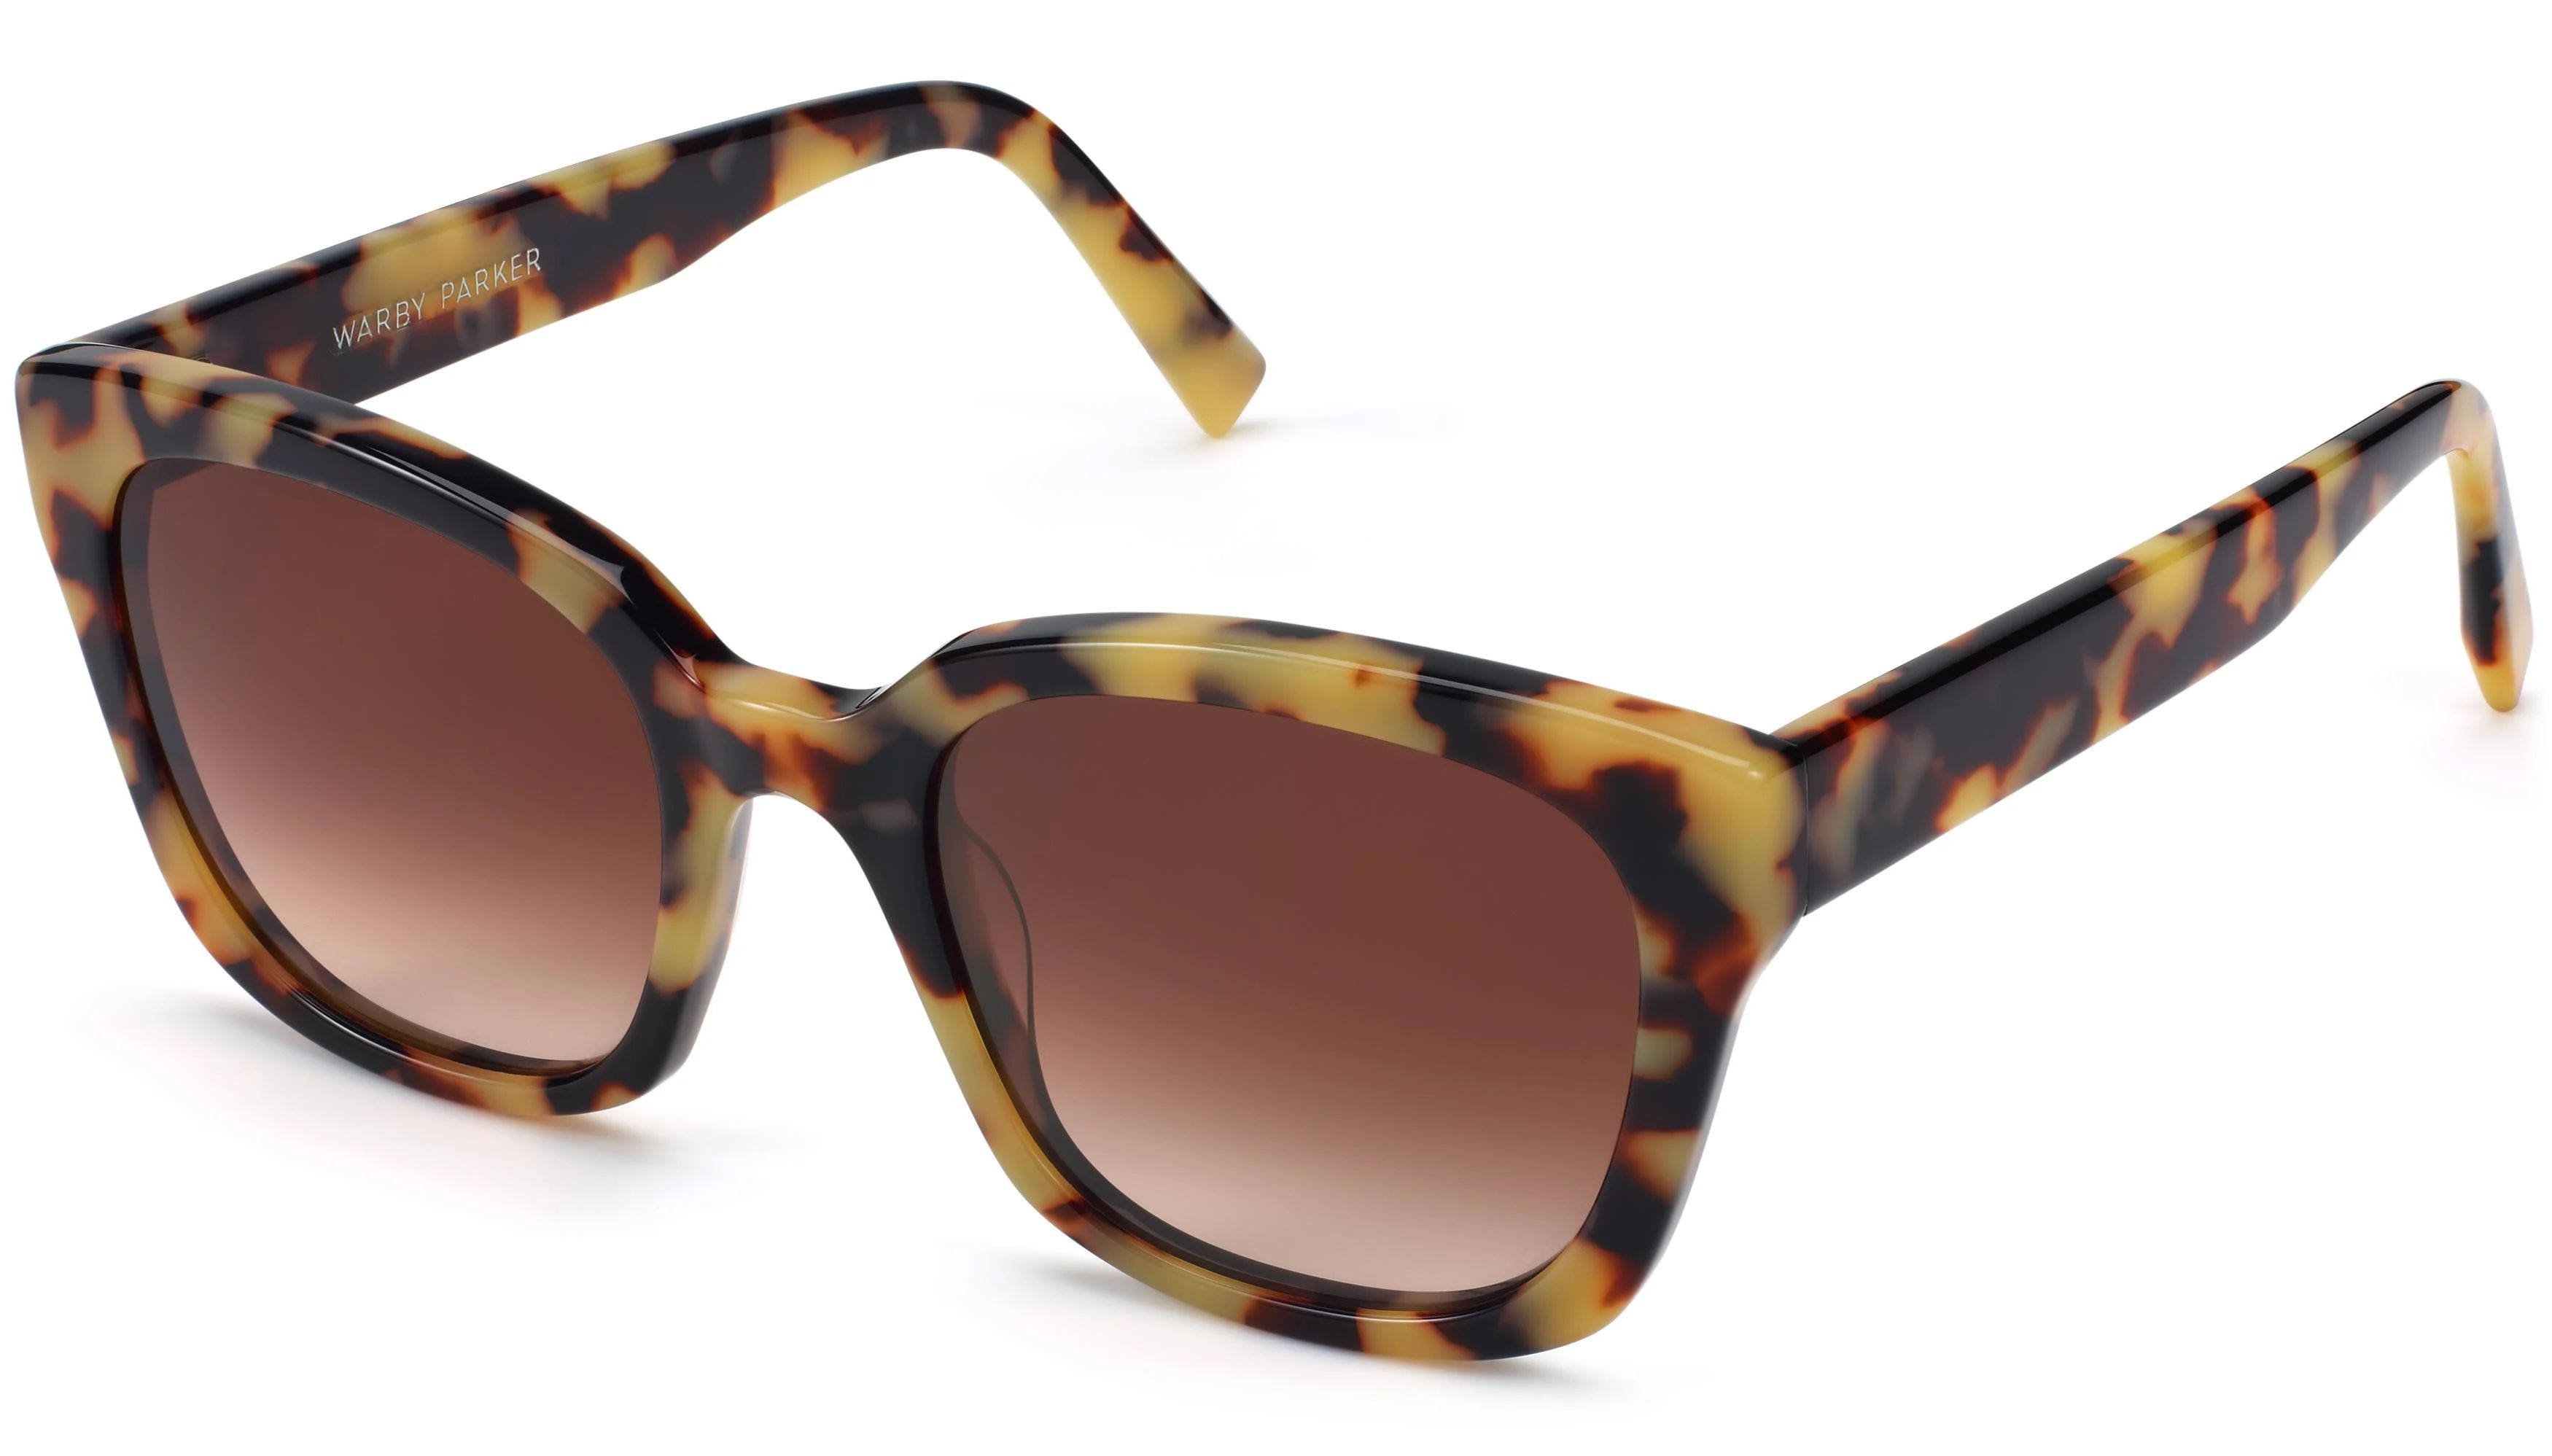 Aubrey Sunglasses in Marzipan Tortoise | Warby Parker | Warby Parker (US)